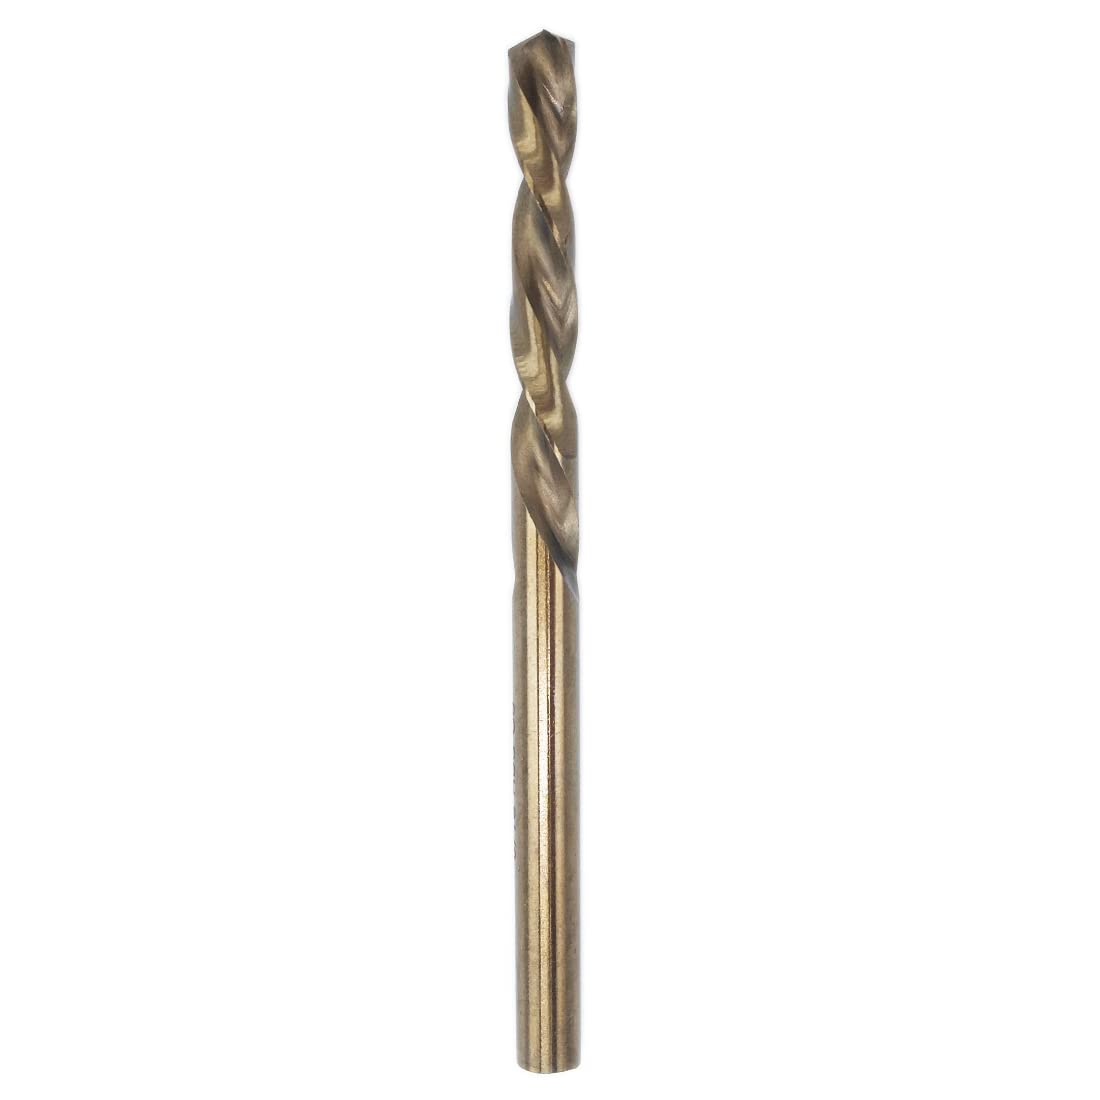 3/16-Inch Cobalt Steel M35 Left Hand Drill Bit for Removing Damaged Bolts and Screws, Pack of 6